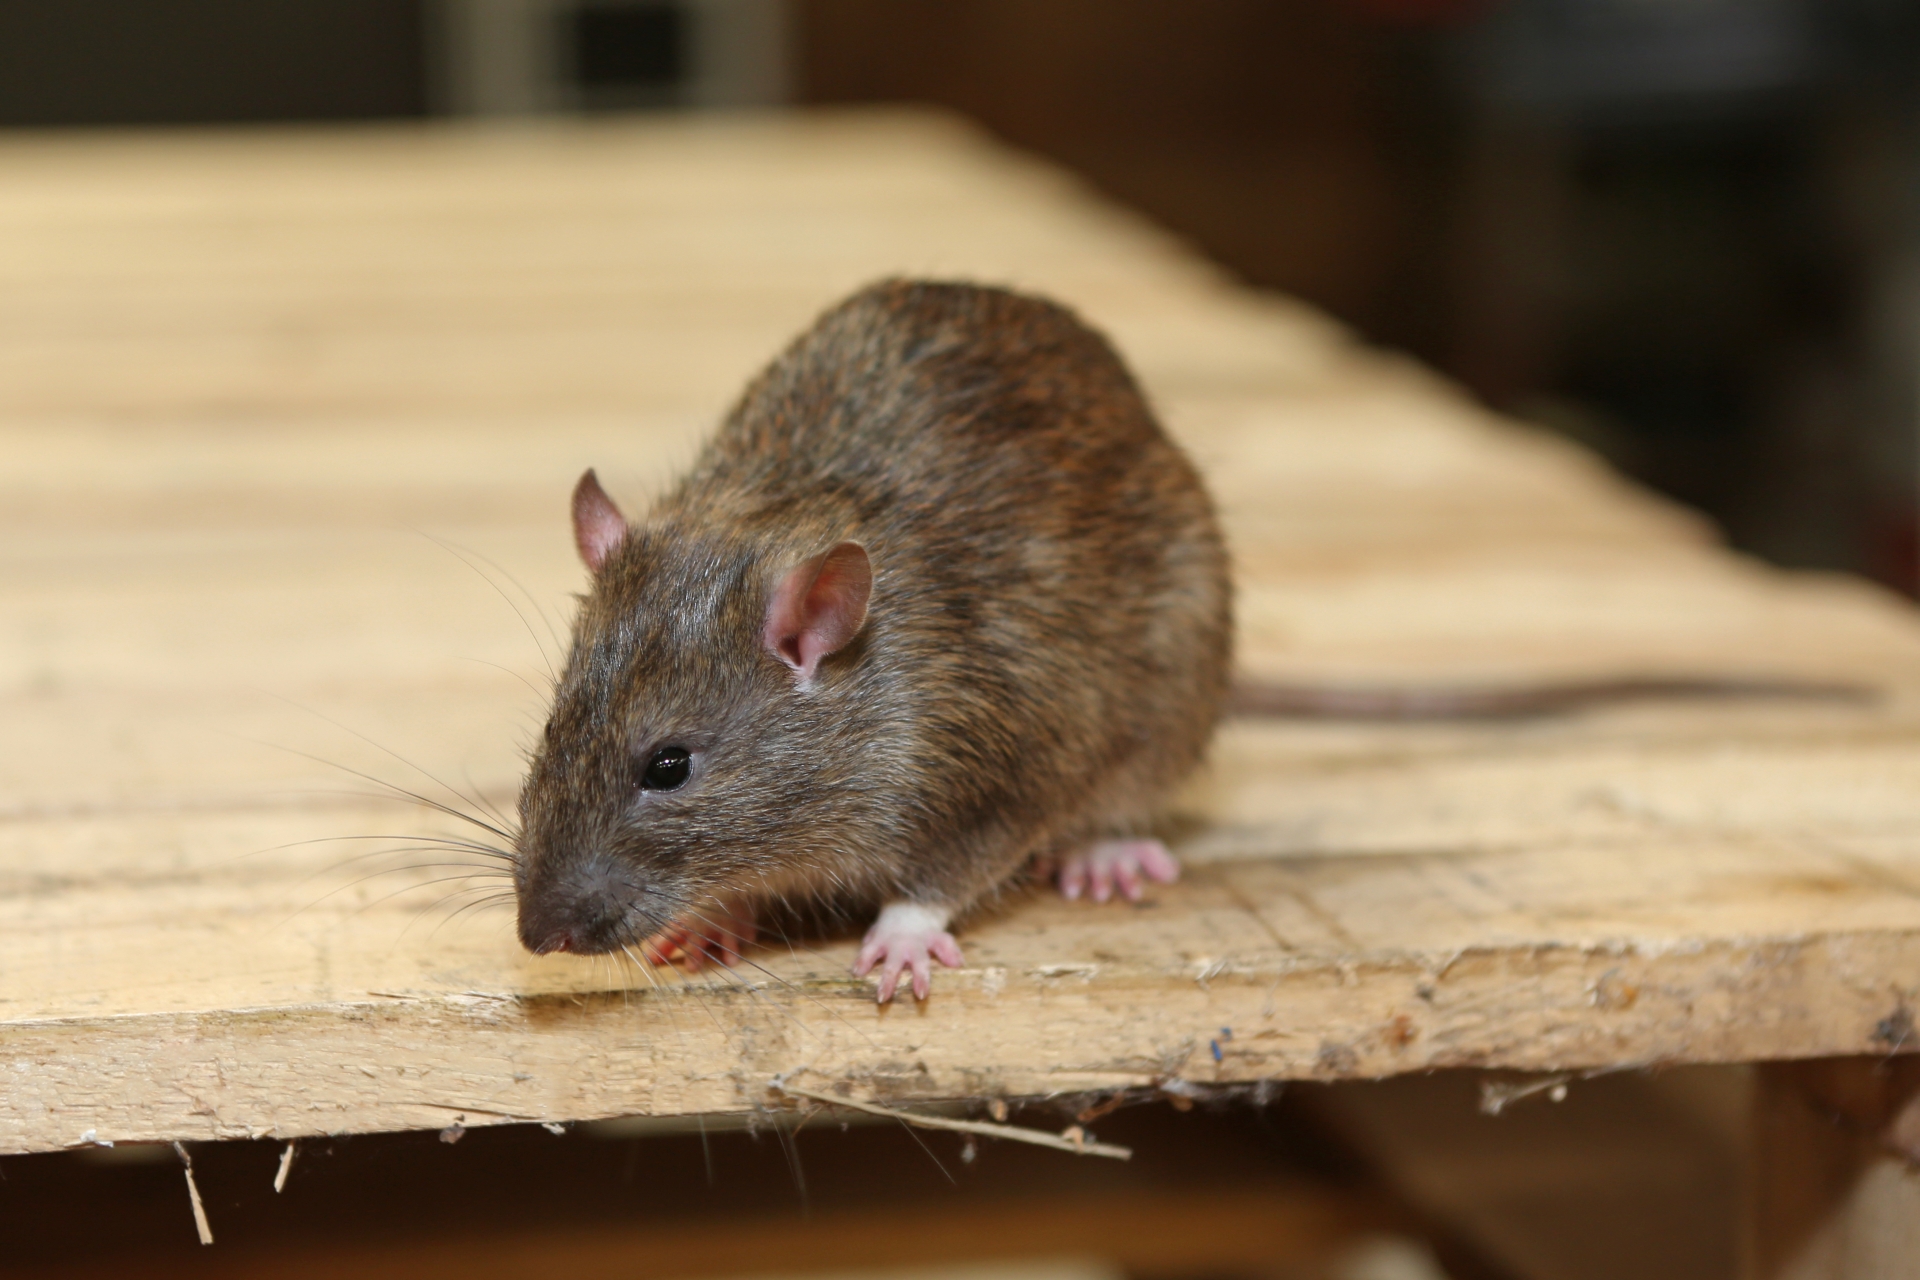 Rat Control, Pest Control in Watford, Cassiobury, WD17. Call Now 020 8166 9746